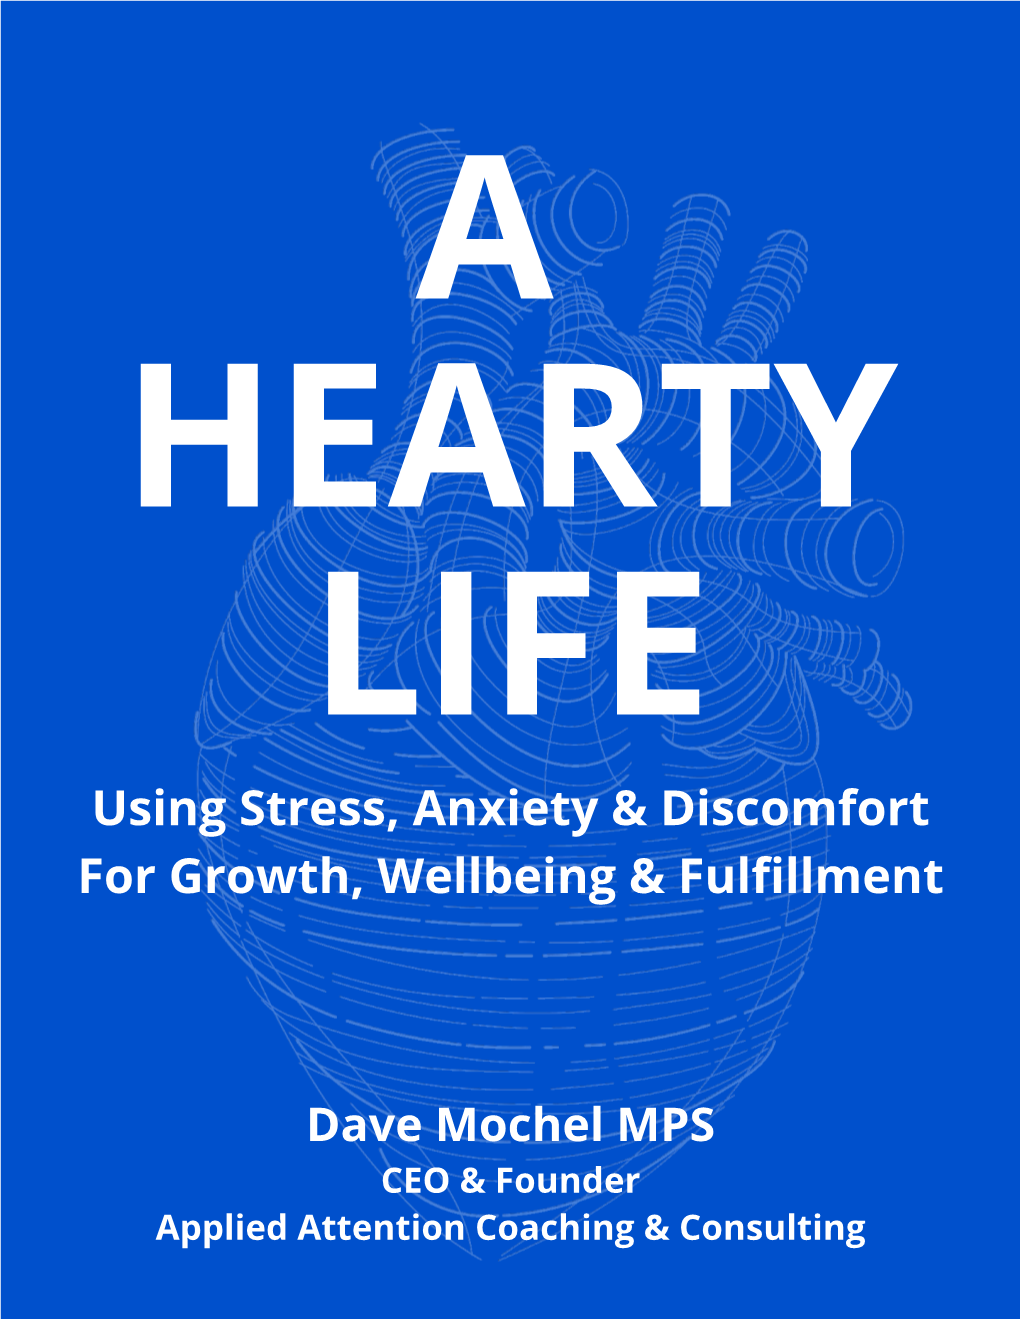 Using Stress, Anxiety & Discomfort for Growth, Wellbeing & Fulfillment